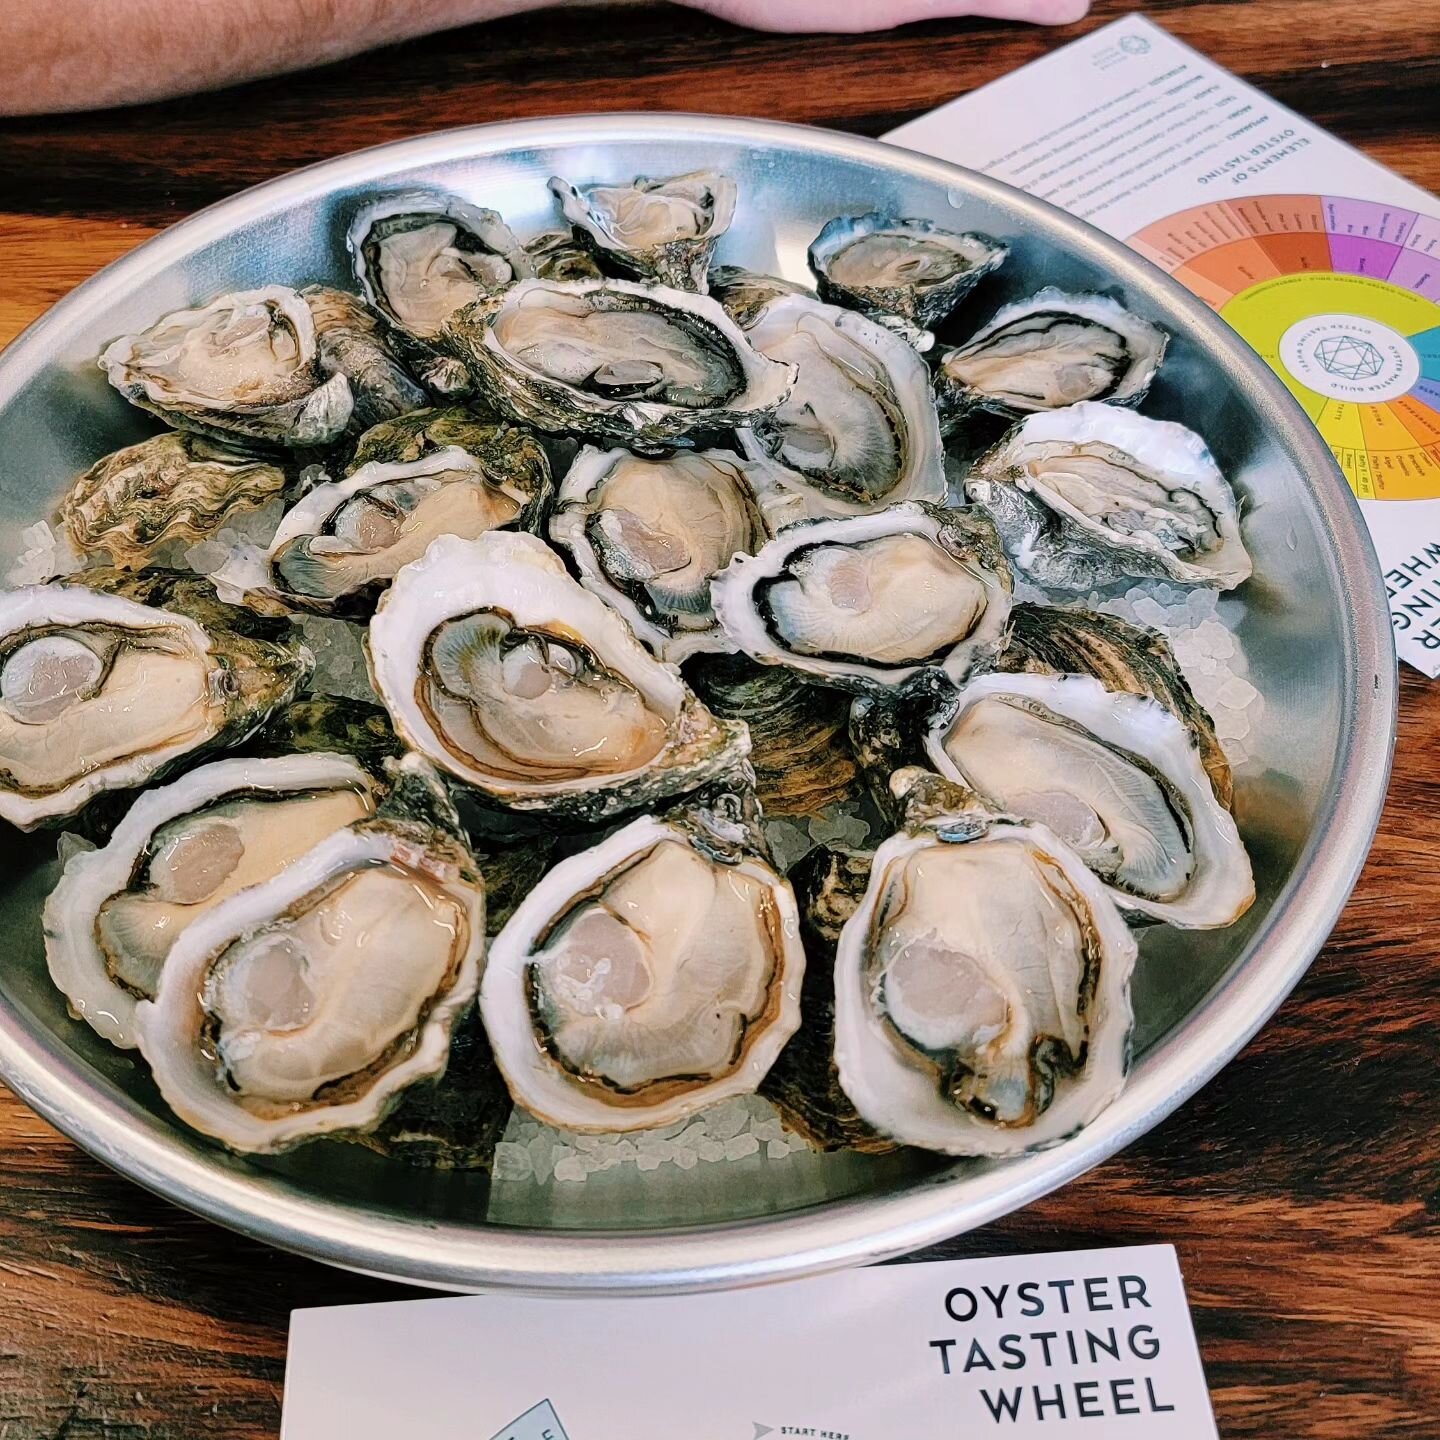 A few weeks ago, I had the very special opportunity to taste a flight of West Coast oysters with Chef Drew Deckman @bajafishingchef and friends at @original40beer, a beautiful brewery that&rsquo;s next door to his new, soon-to-be-opened restaurant @3